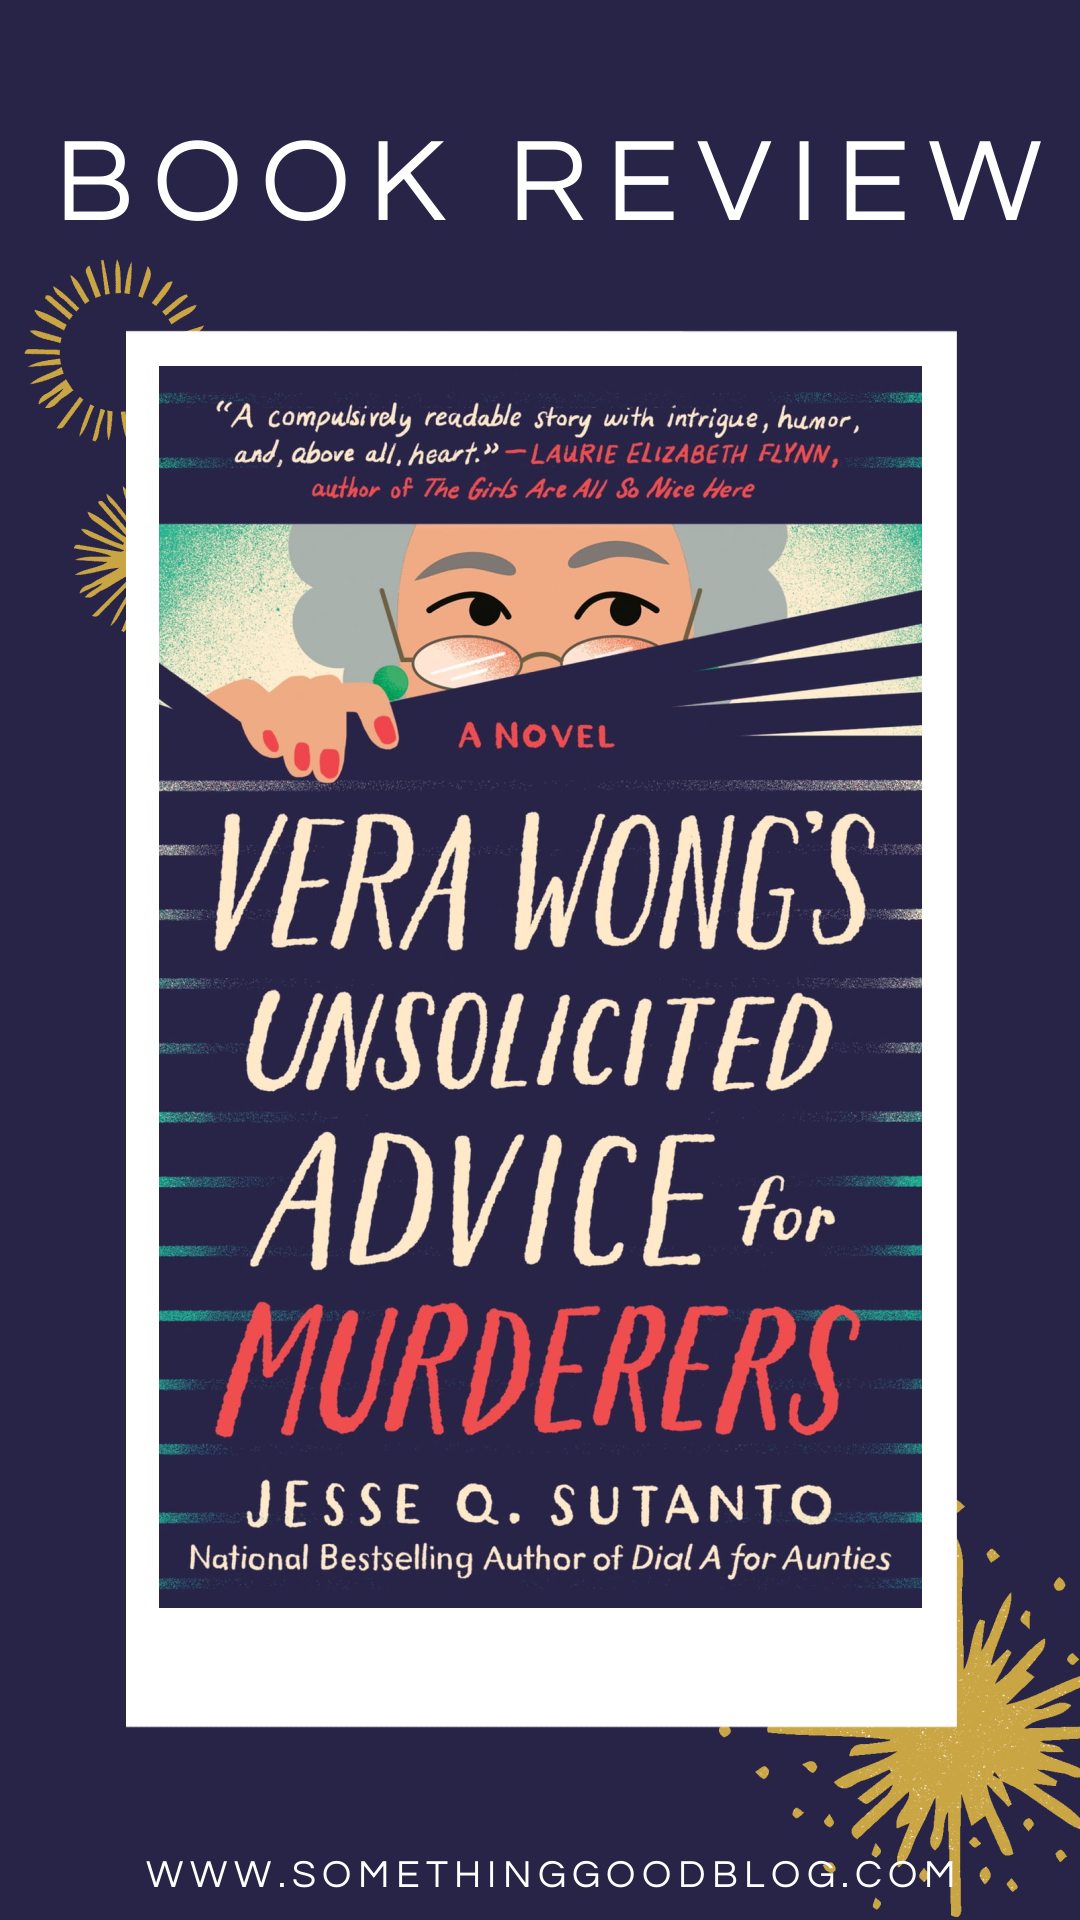 Vera Wong's Unsolicited Advice for Murderers by Jesse Q. Sutanto, Book Review